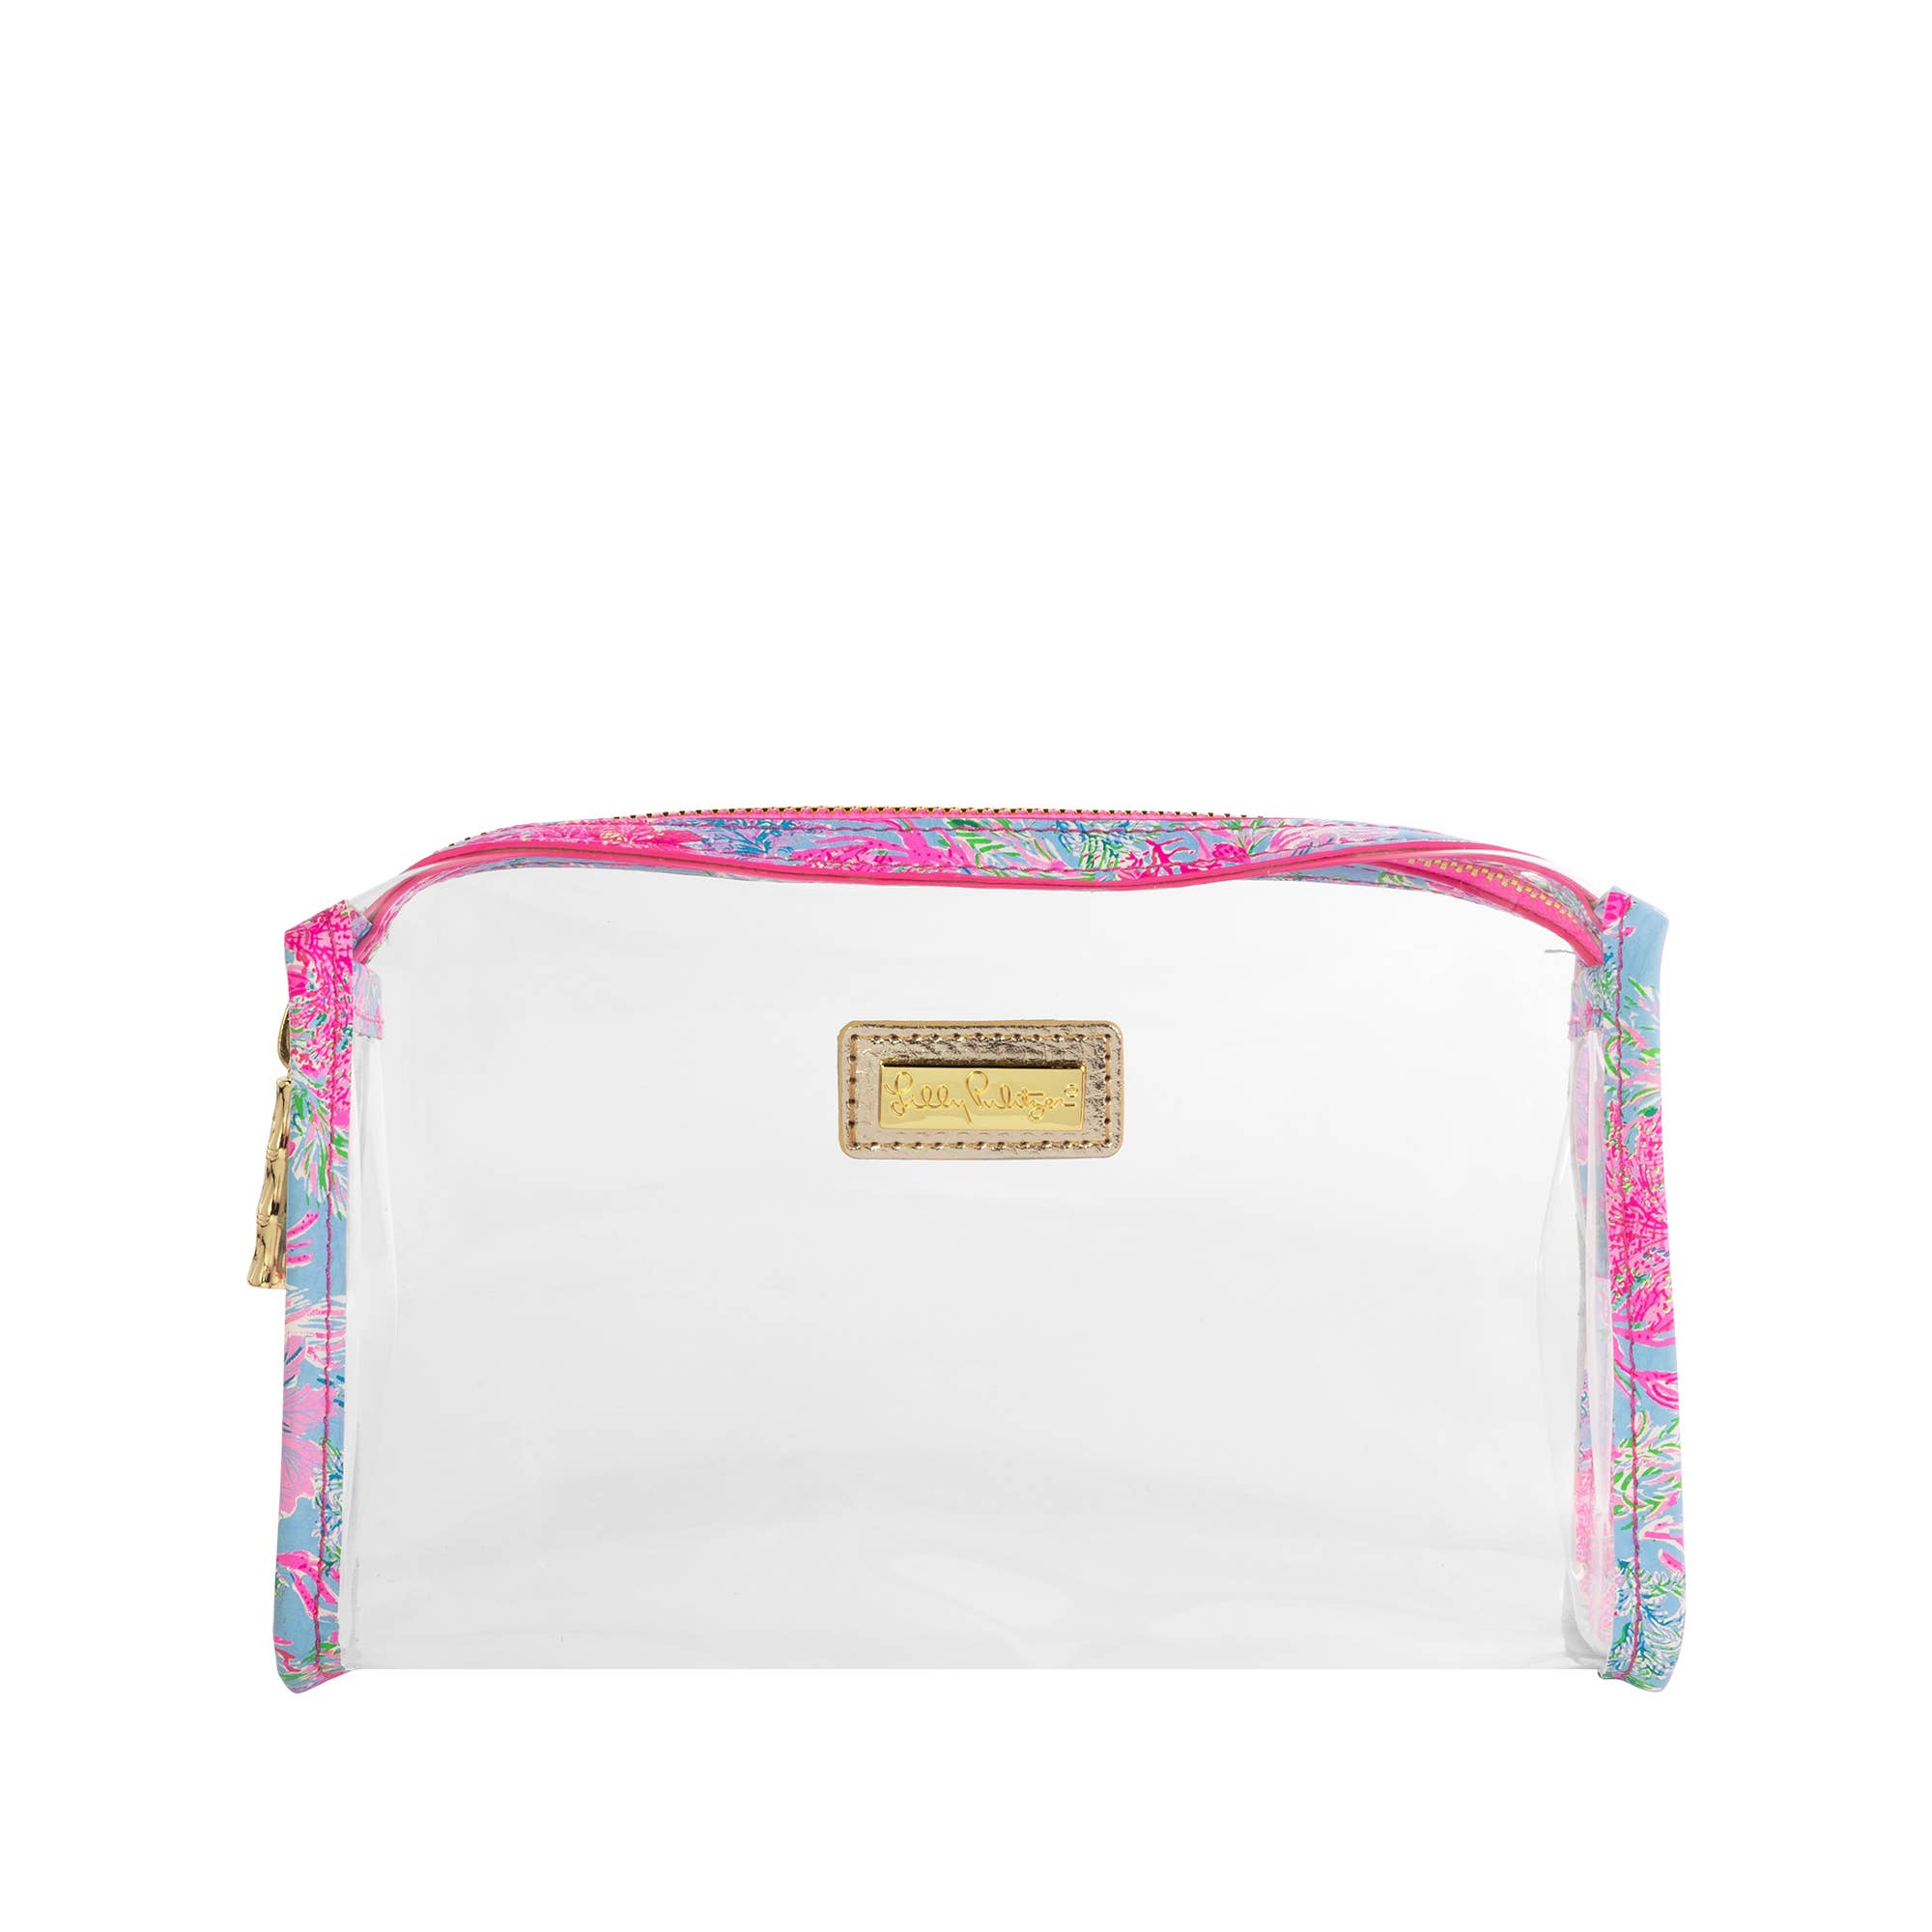 Lilly Pulitzer Pencil Case-Cay to my Heart